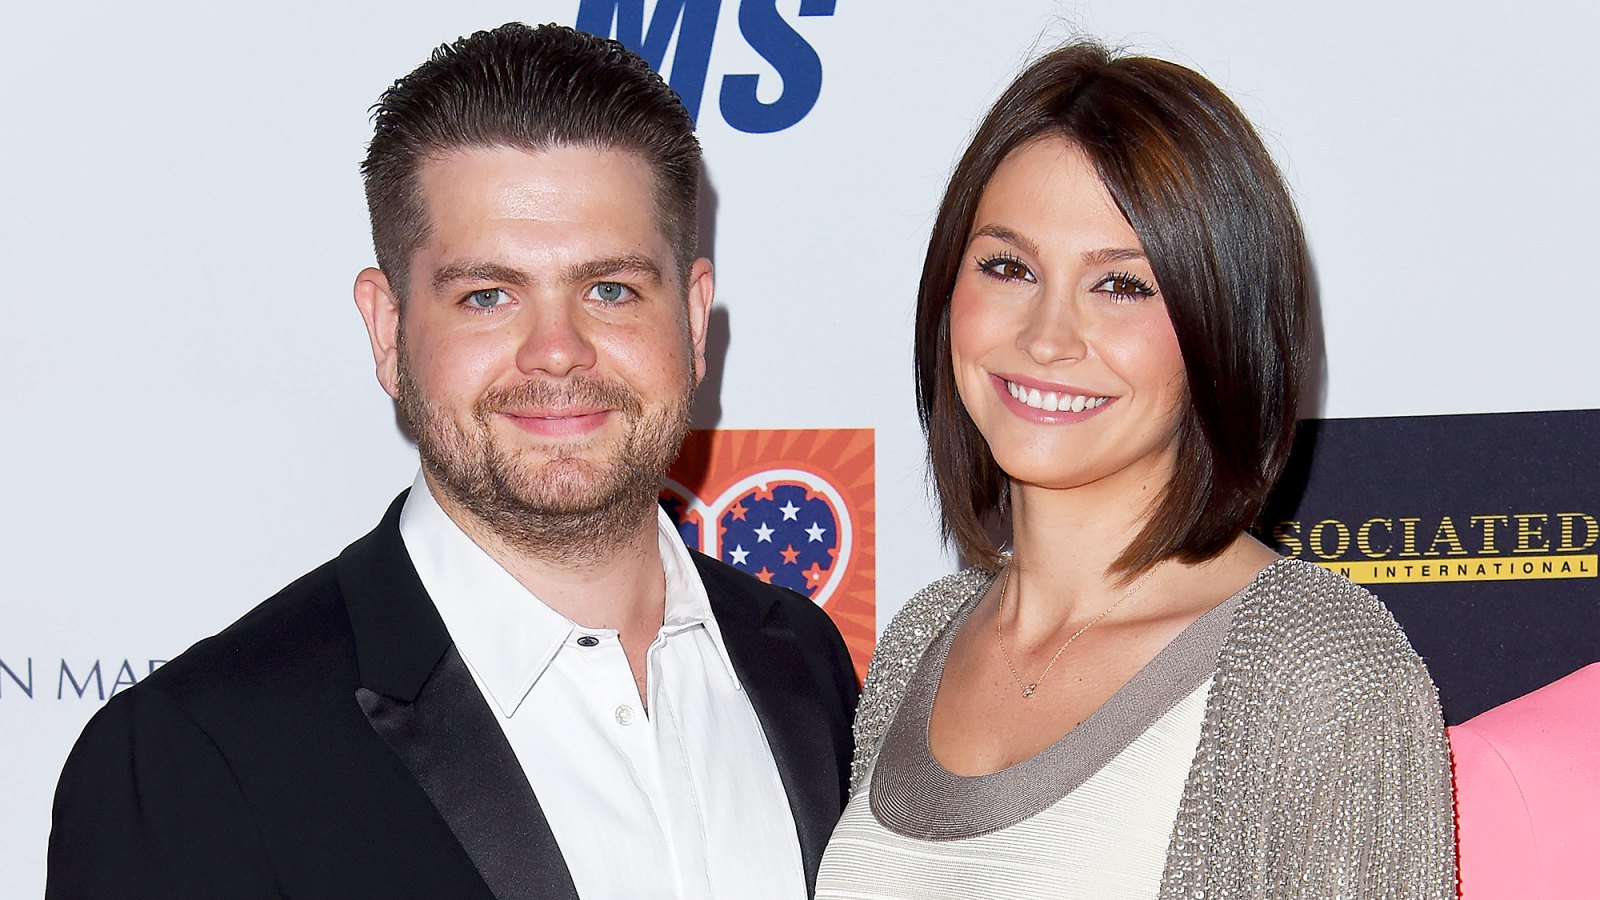 Jack Osbourne and wife Lisa arrive at the 22nd Annual Race To Erase MS at the Hyatt Regency Century Plaza on April 24, 2015.